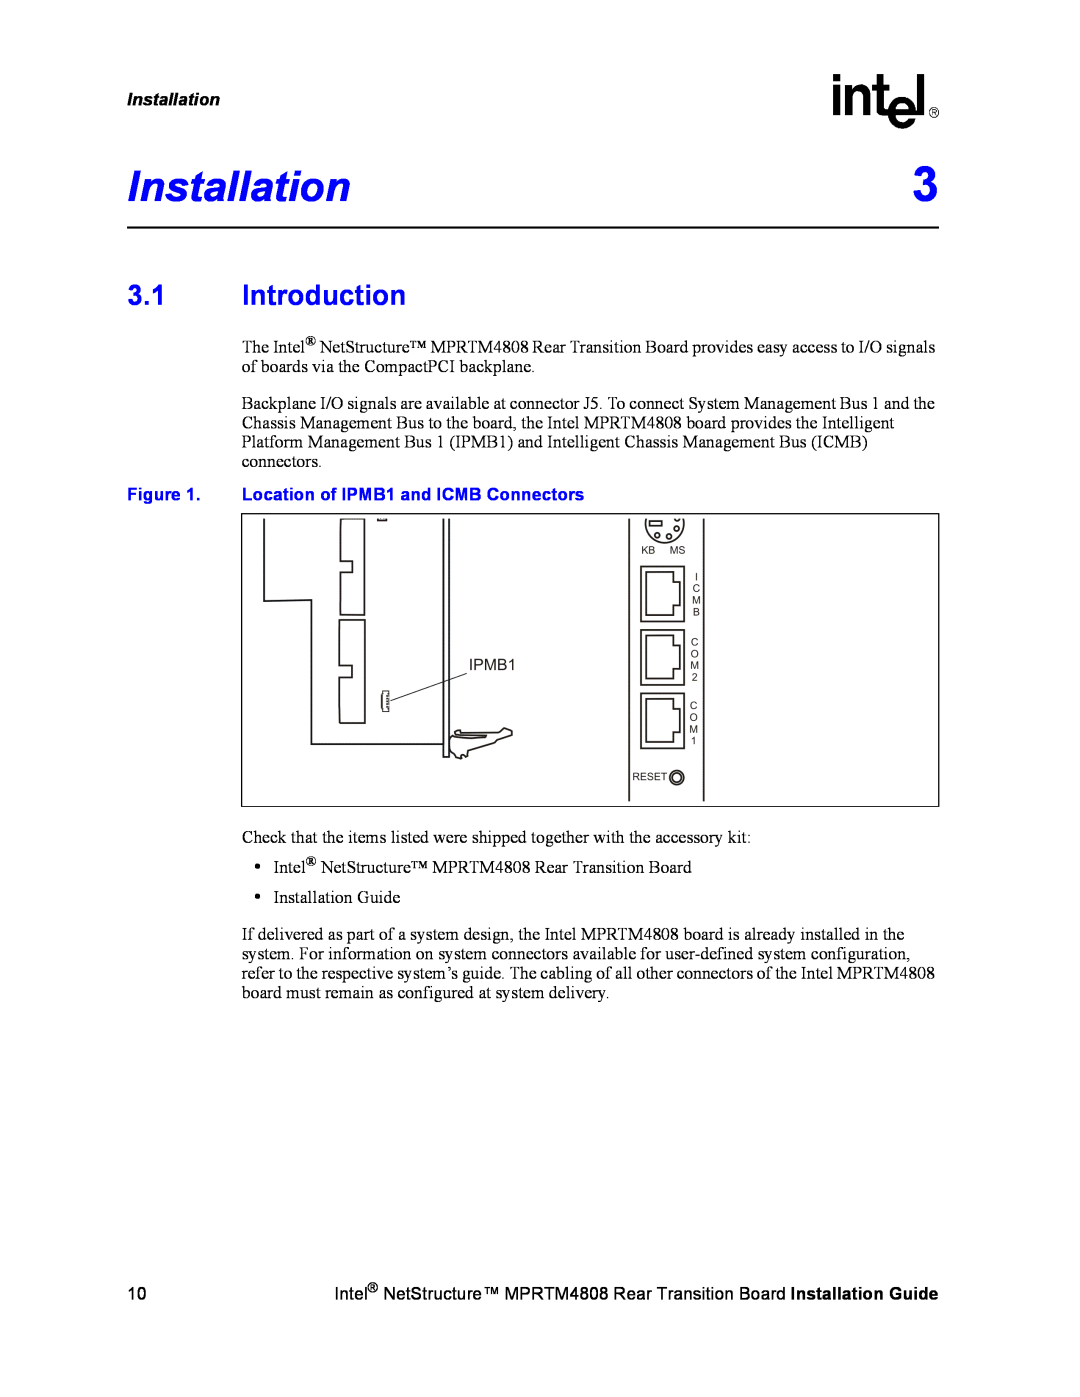 Intel MPRTM4808 manual Installation3, 3.1Introduction, Location of IPMB1 and ICMB Connectors 